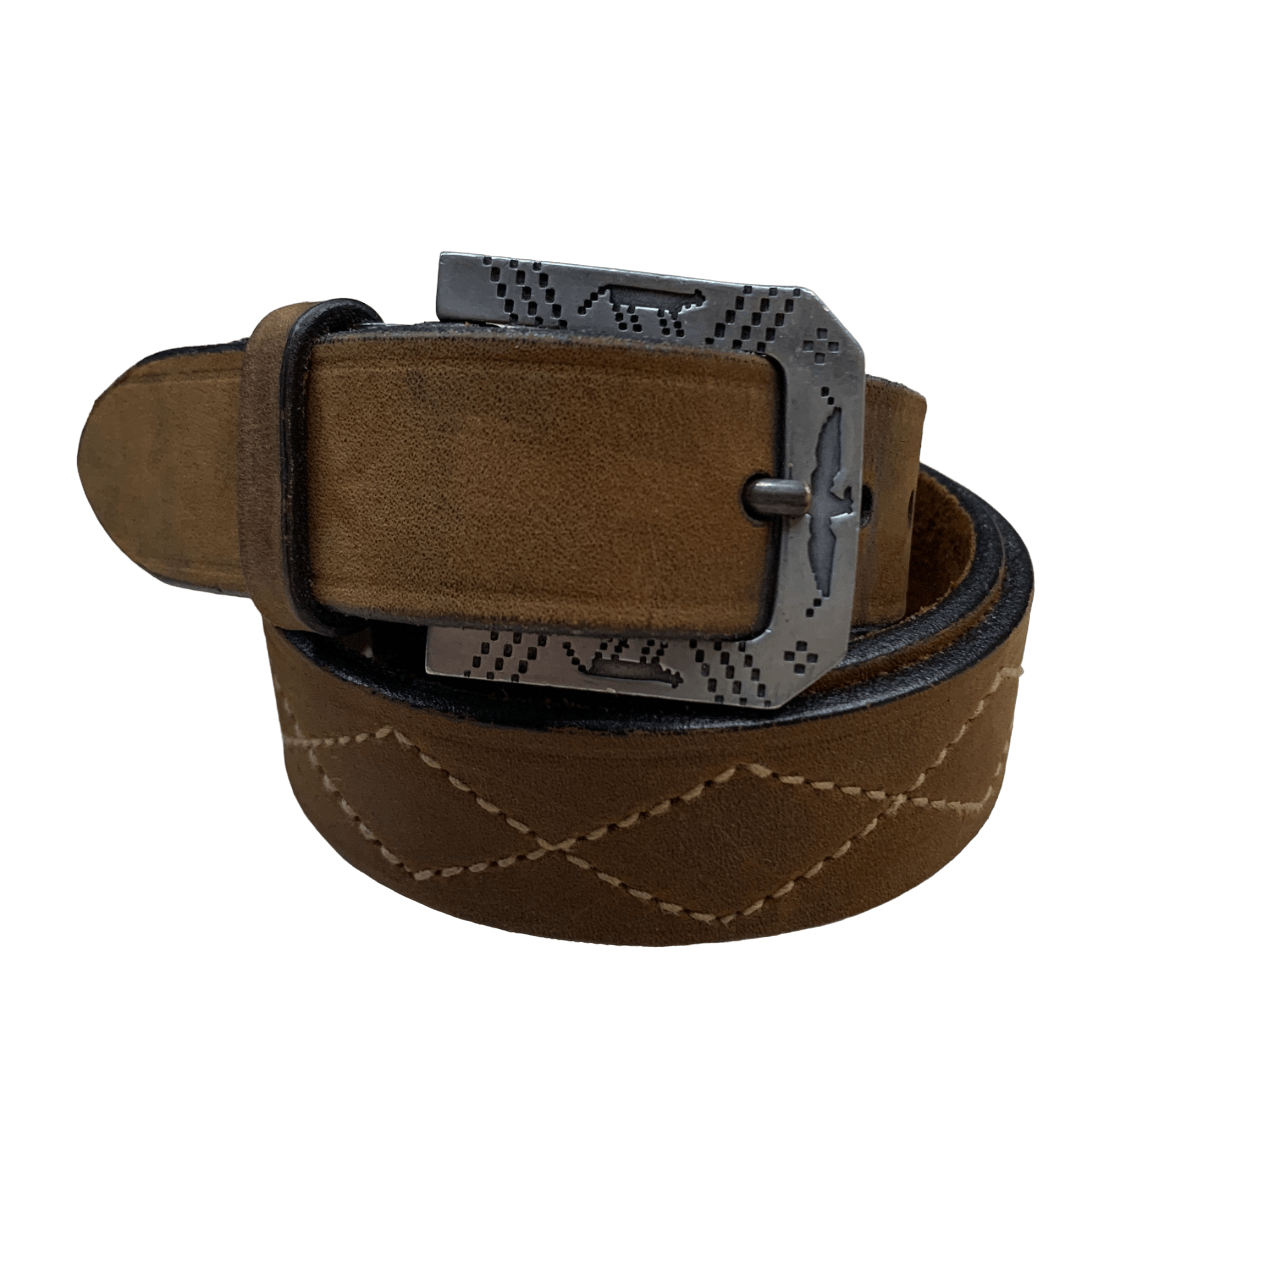 Leather Suede Belt with Engraved Buckle